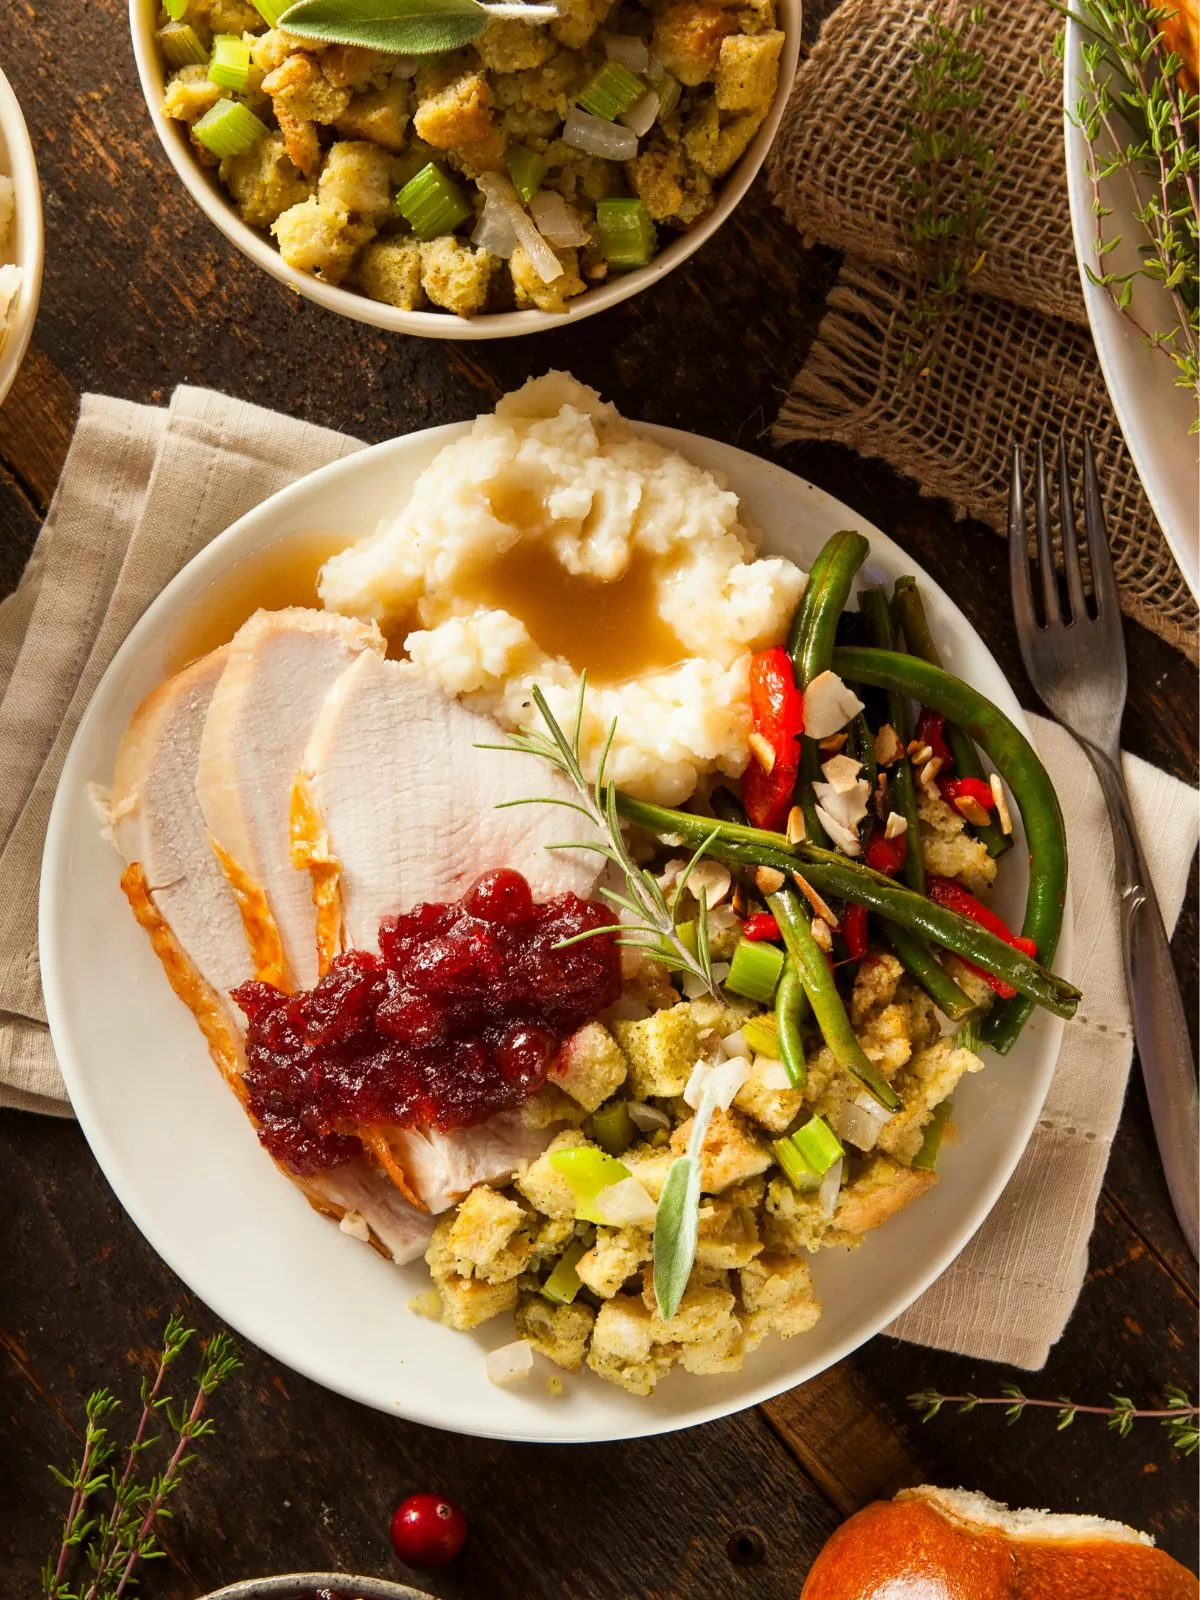 turkey dinner with stuffing, mashed potatoes, green beans and cranberry sauce on plate.